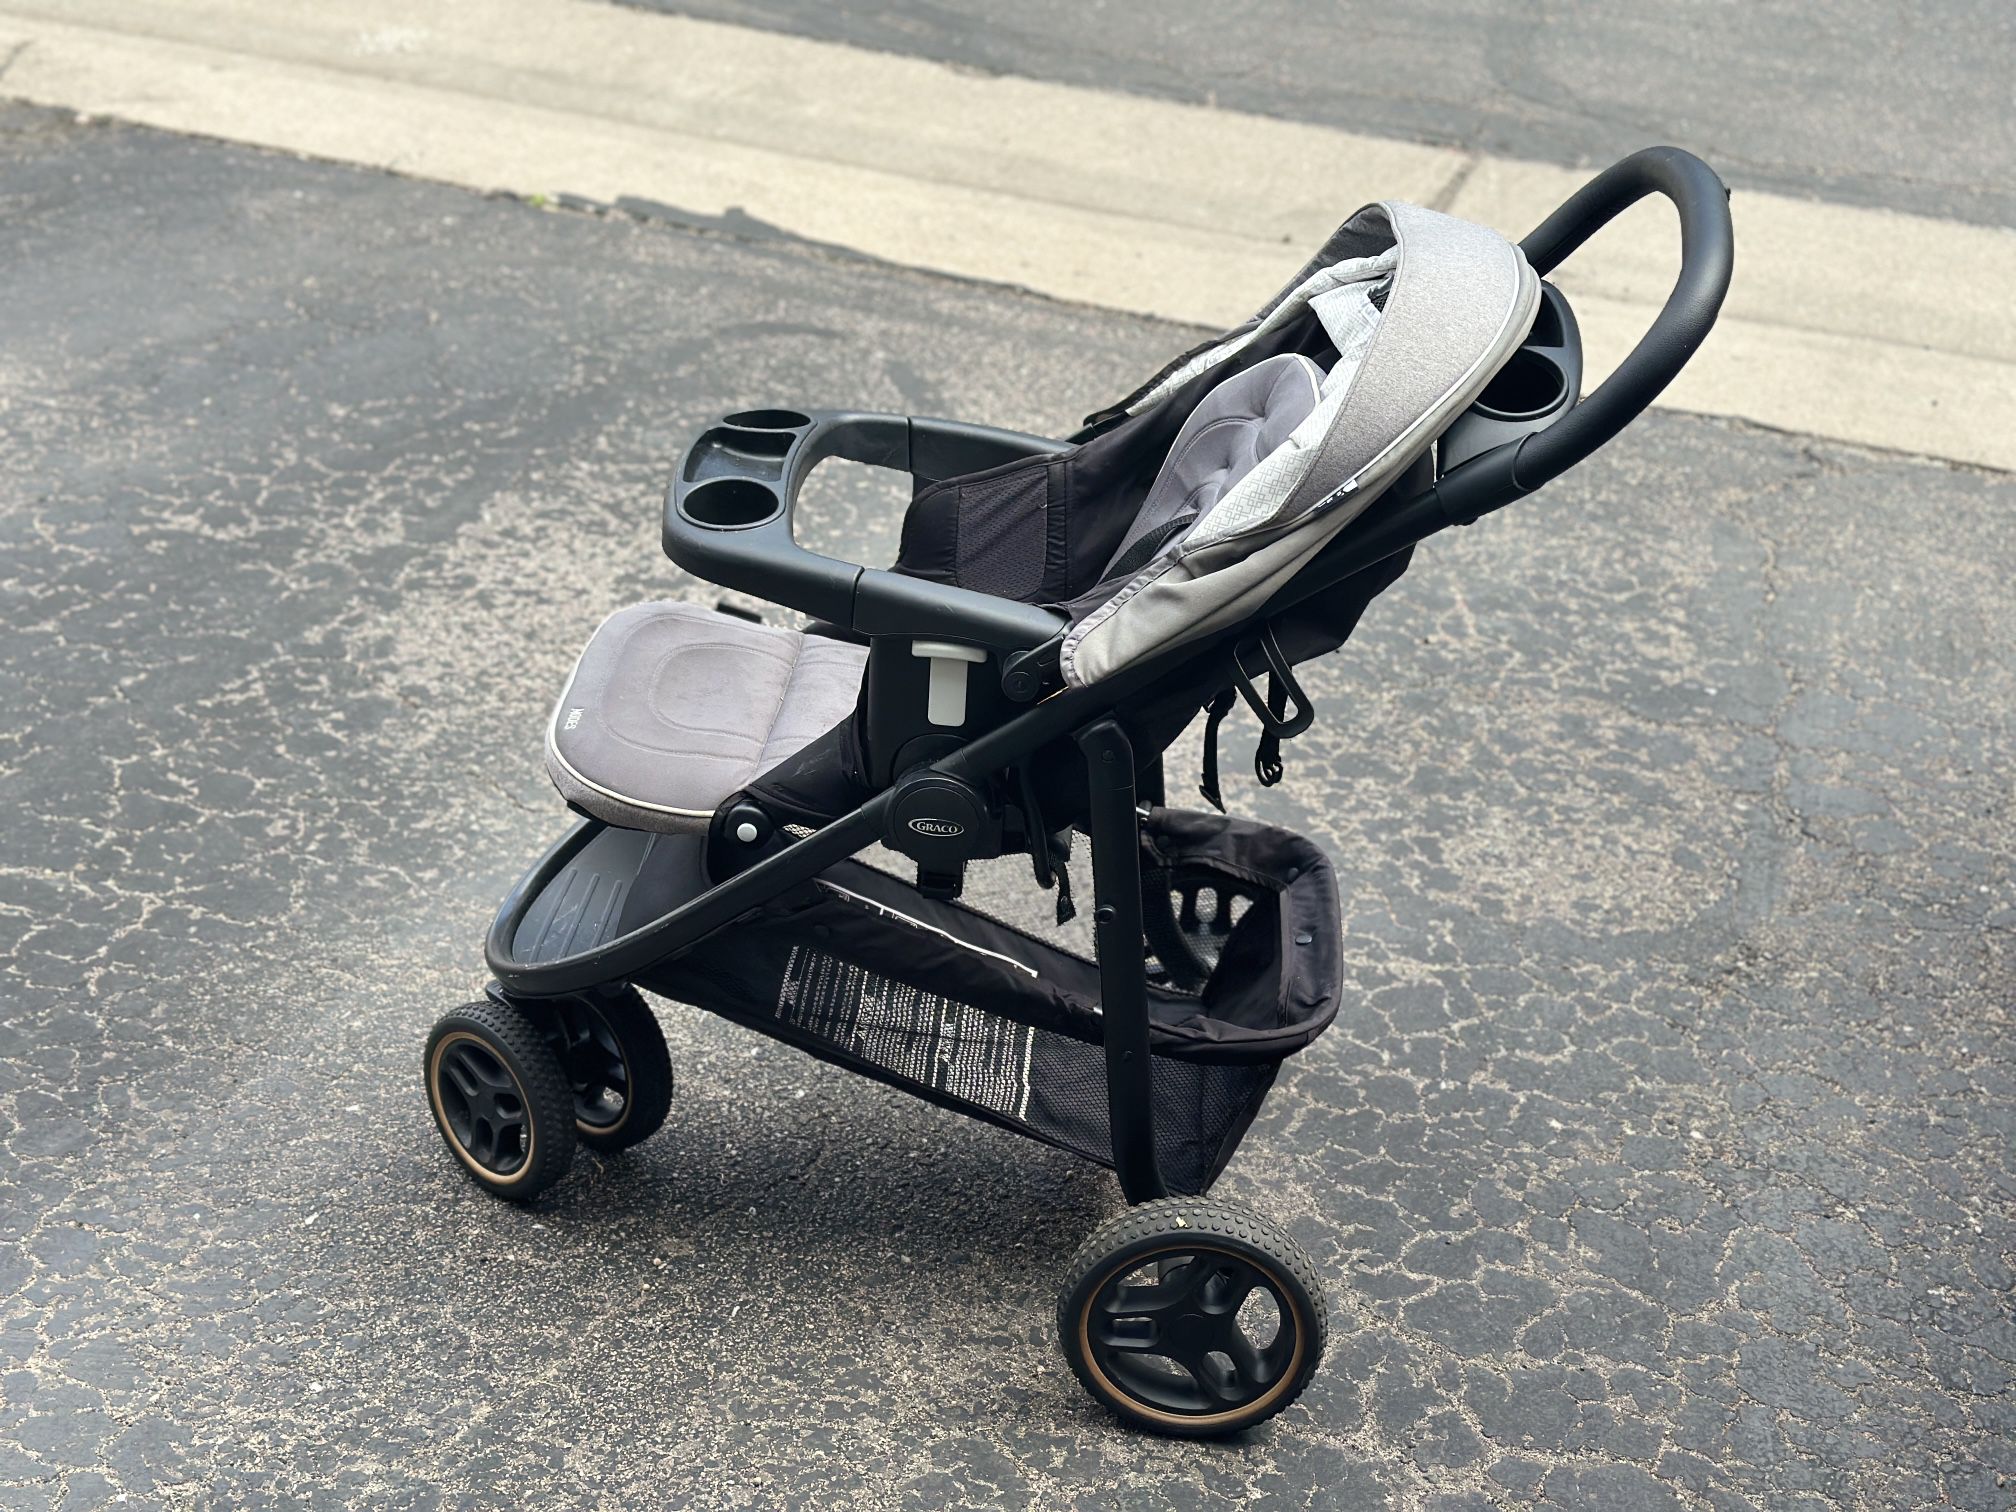 Graco Stroller With Car Seat Used But In Good Condition